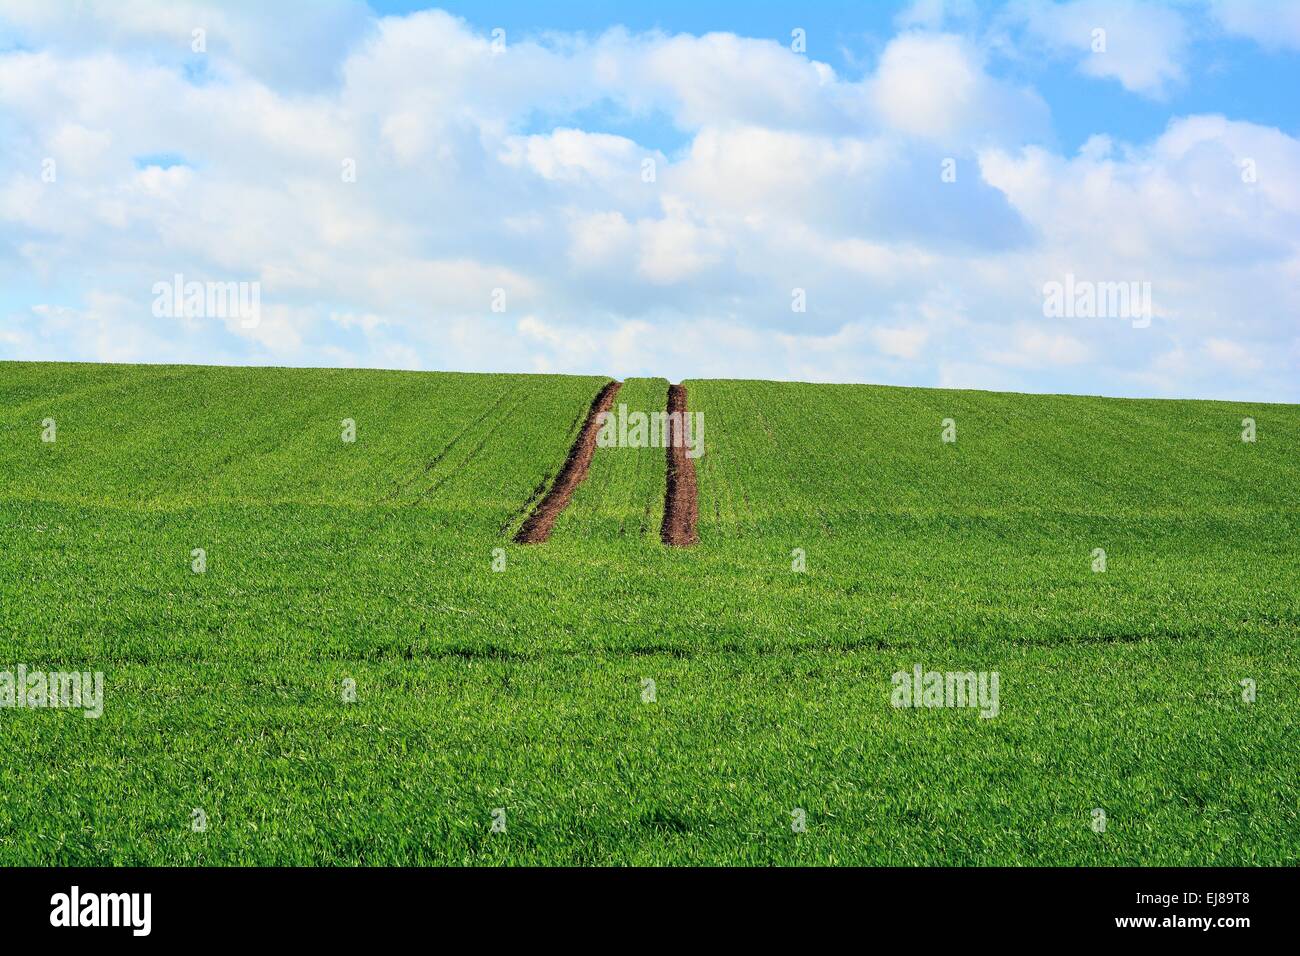 Tire track on a field Stock Photo